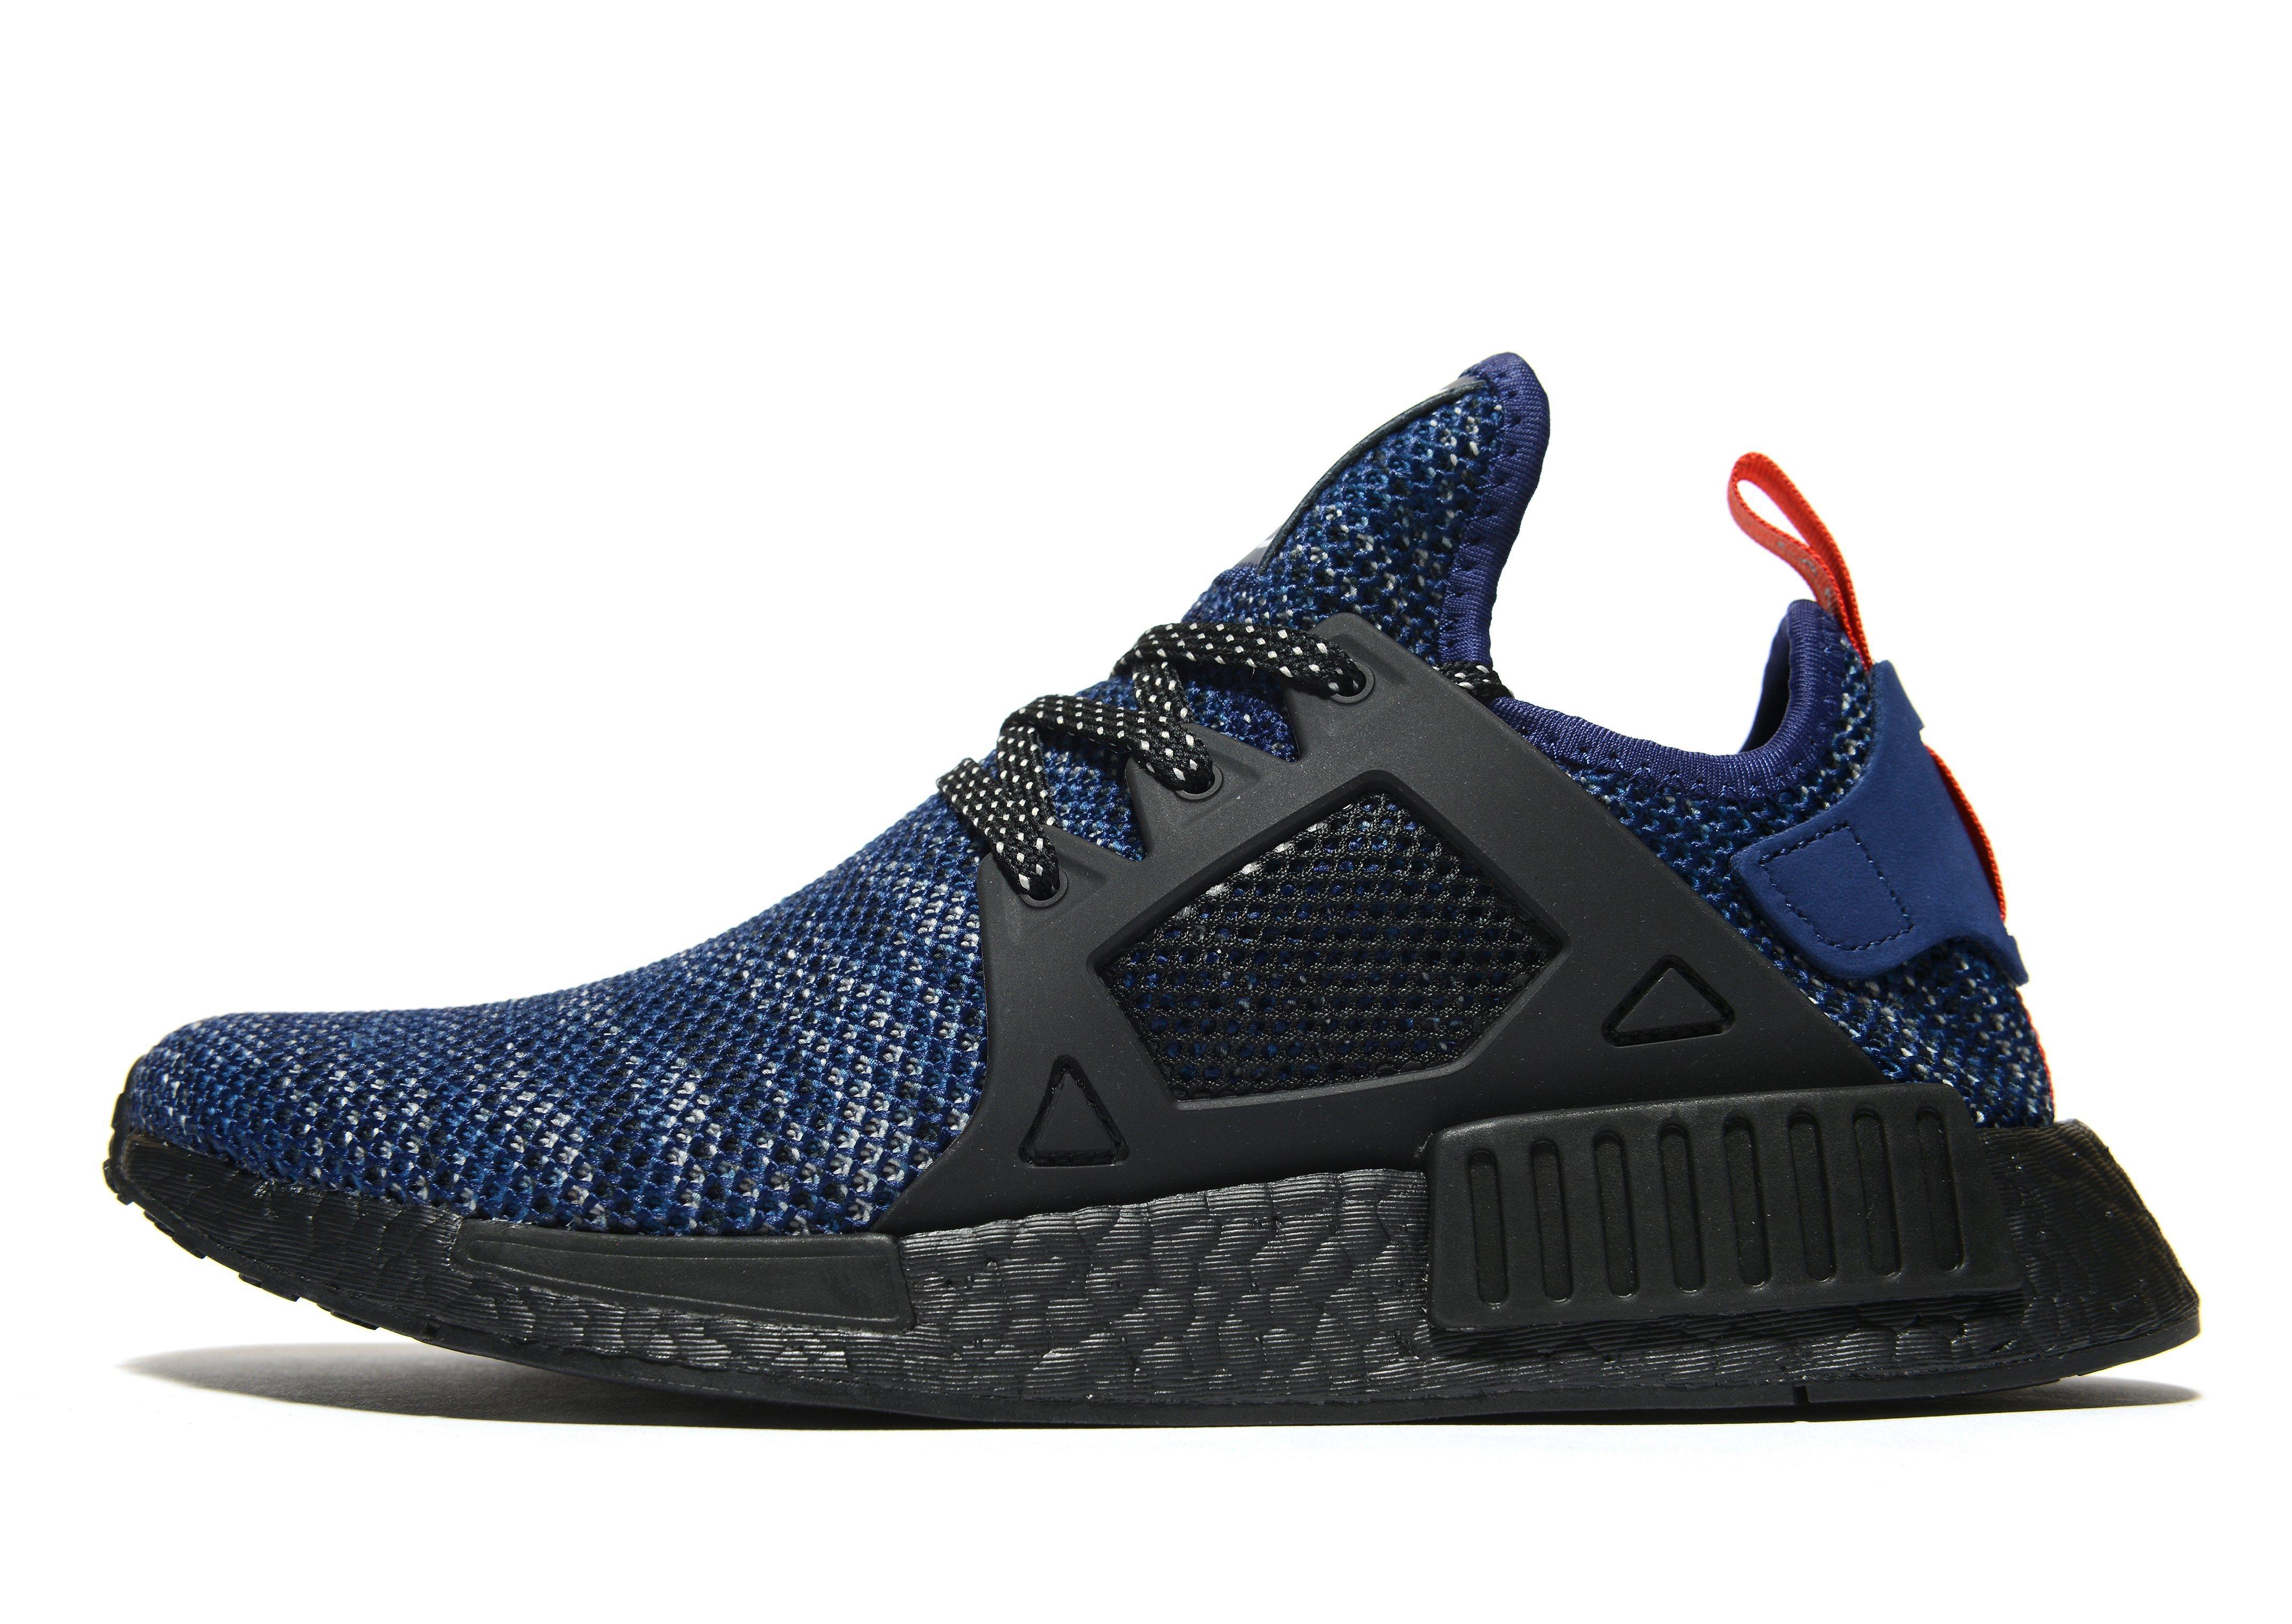 dosis pendul Sikker adidas Originals Synthetic Nmd Xr1 in Navy/Black/Red (Blue) for Men - Lyst